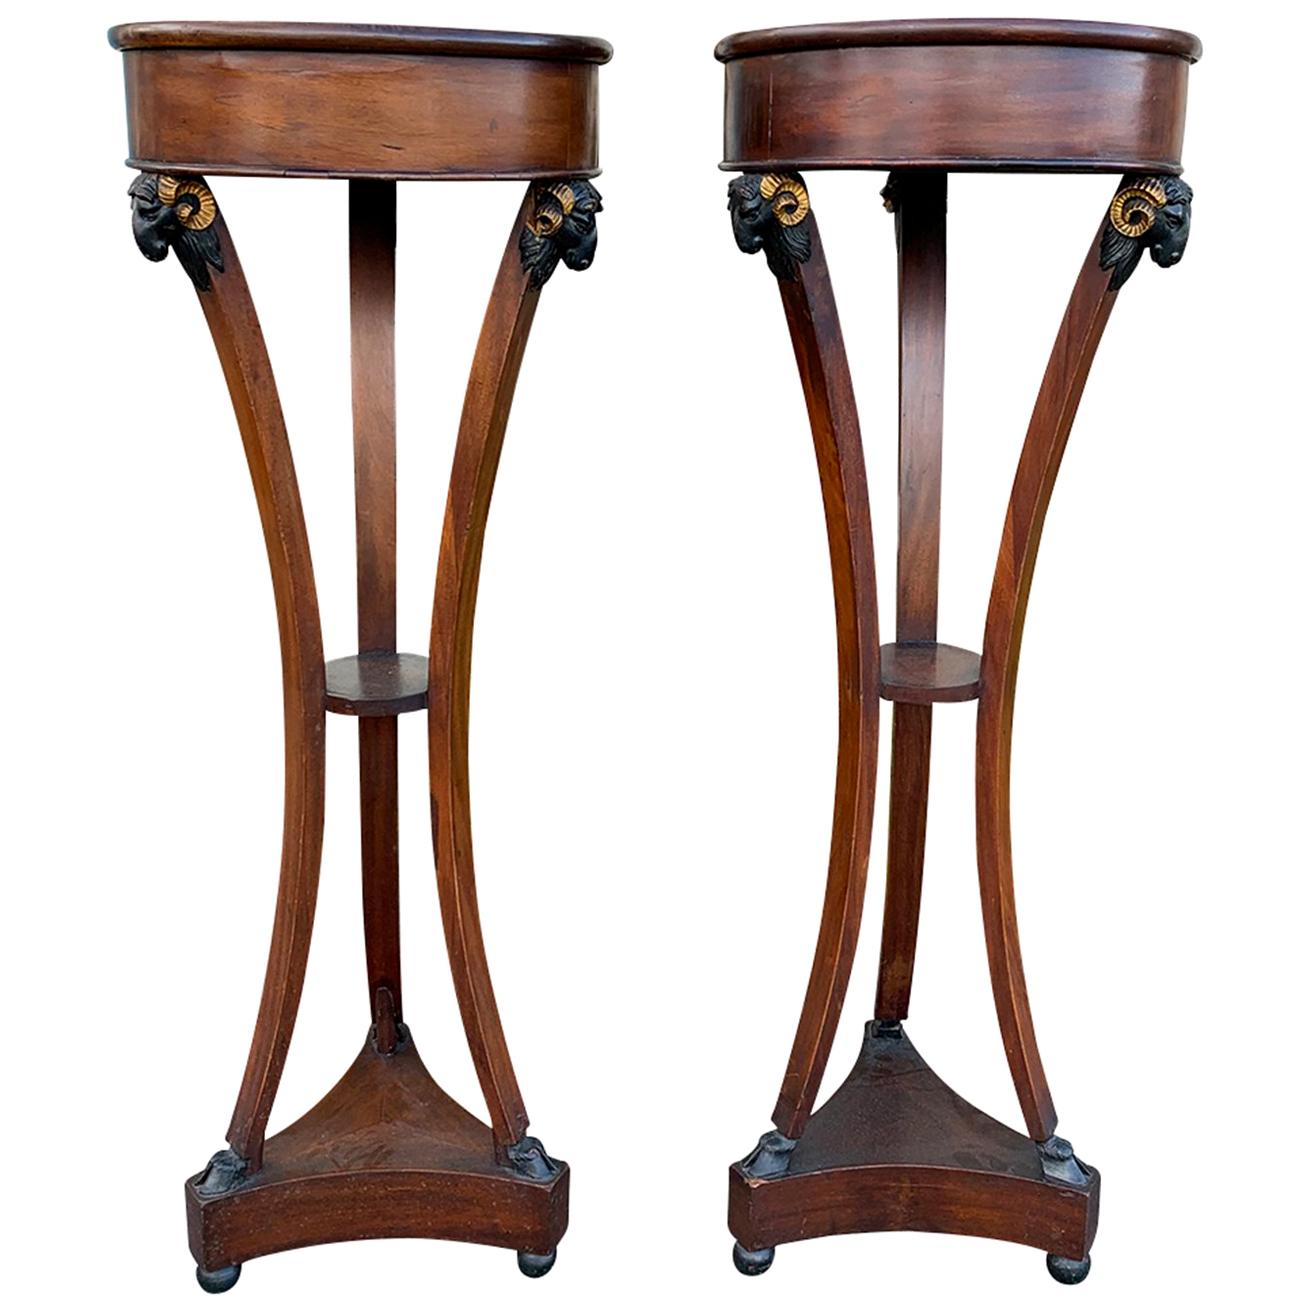 Pair of Early 19th Century Period Italian Directoire Torchieres, circa 1820